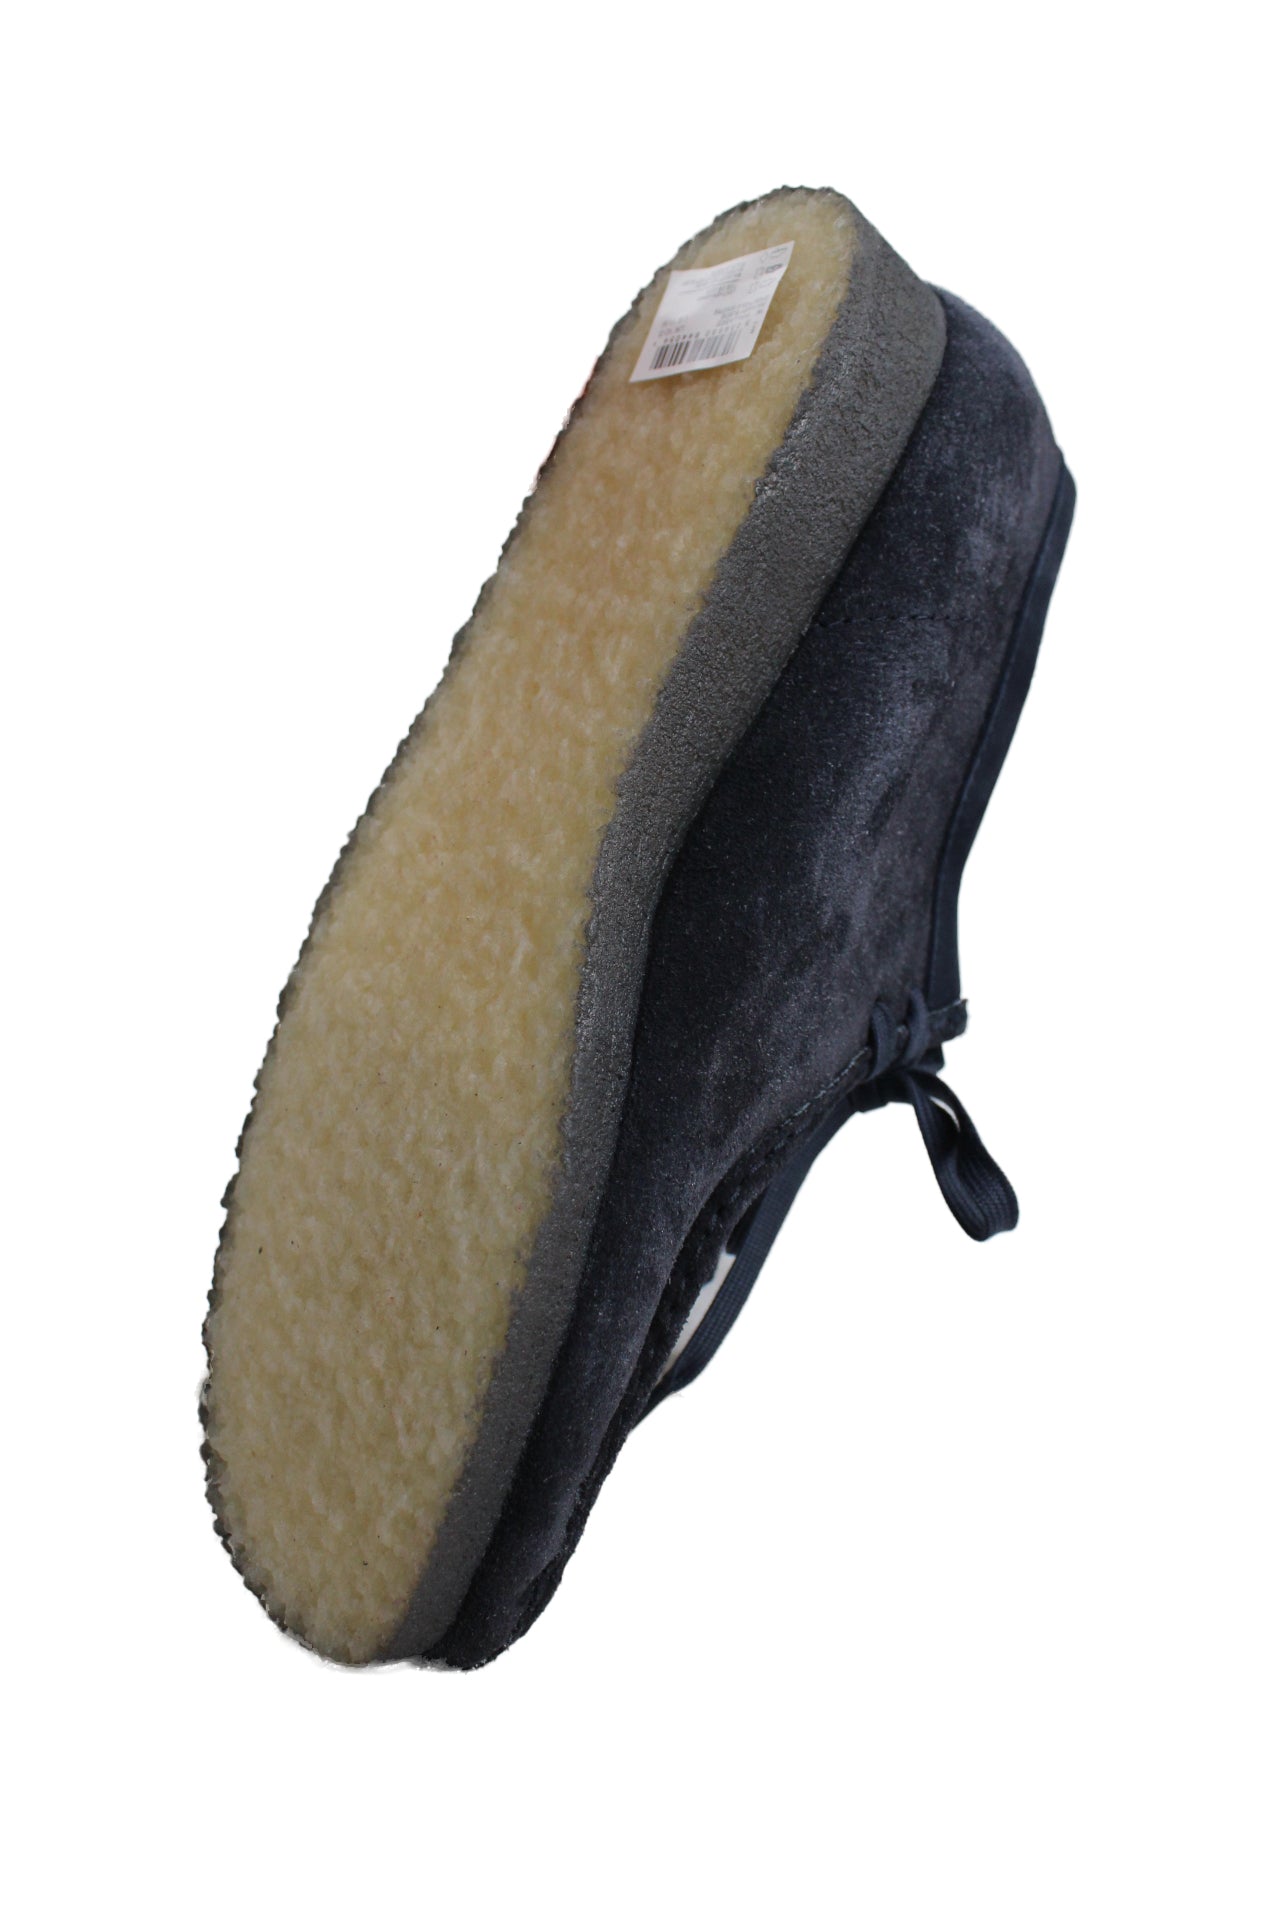 underside view with crepe sole of shoe.